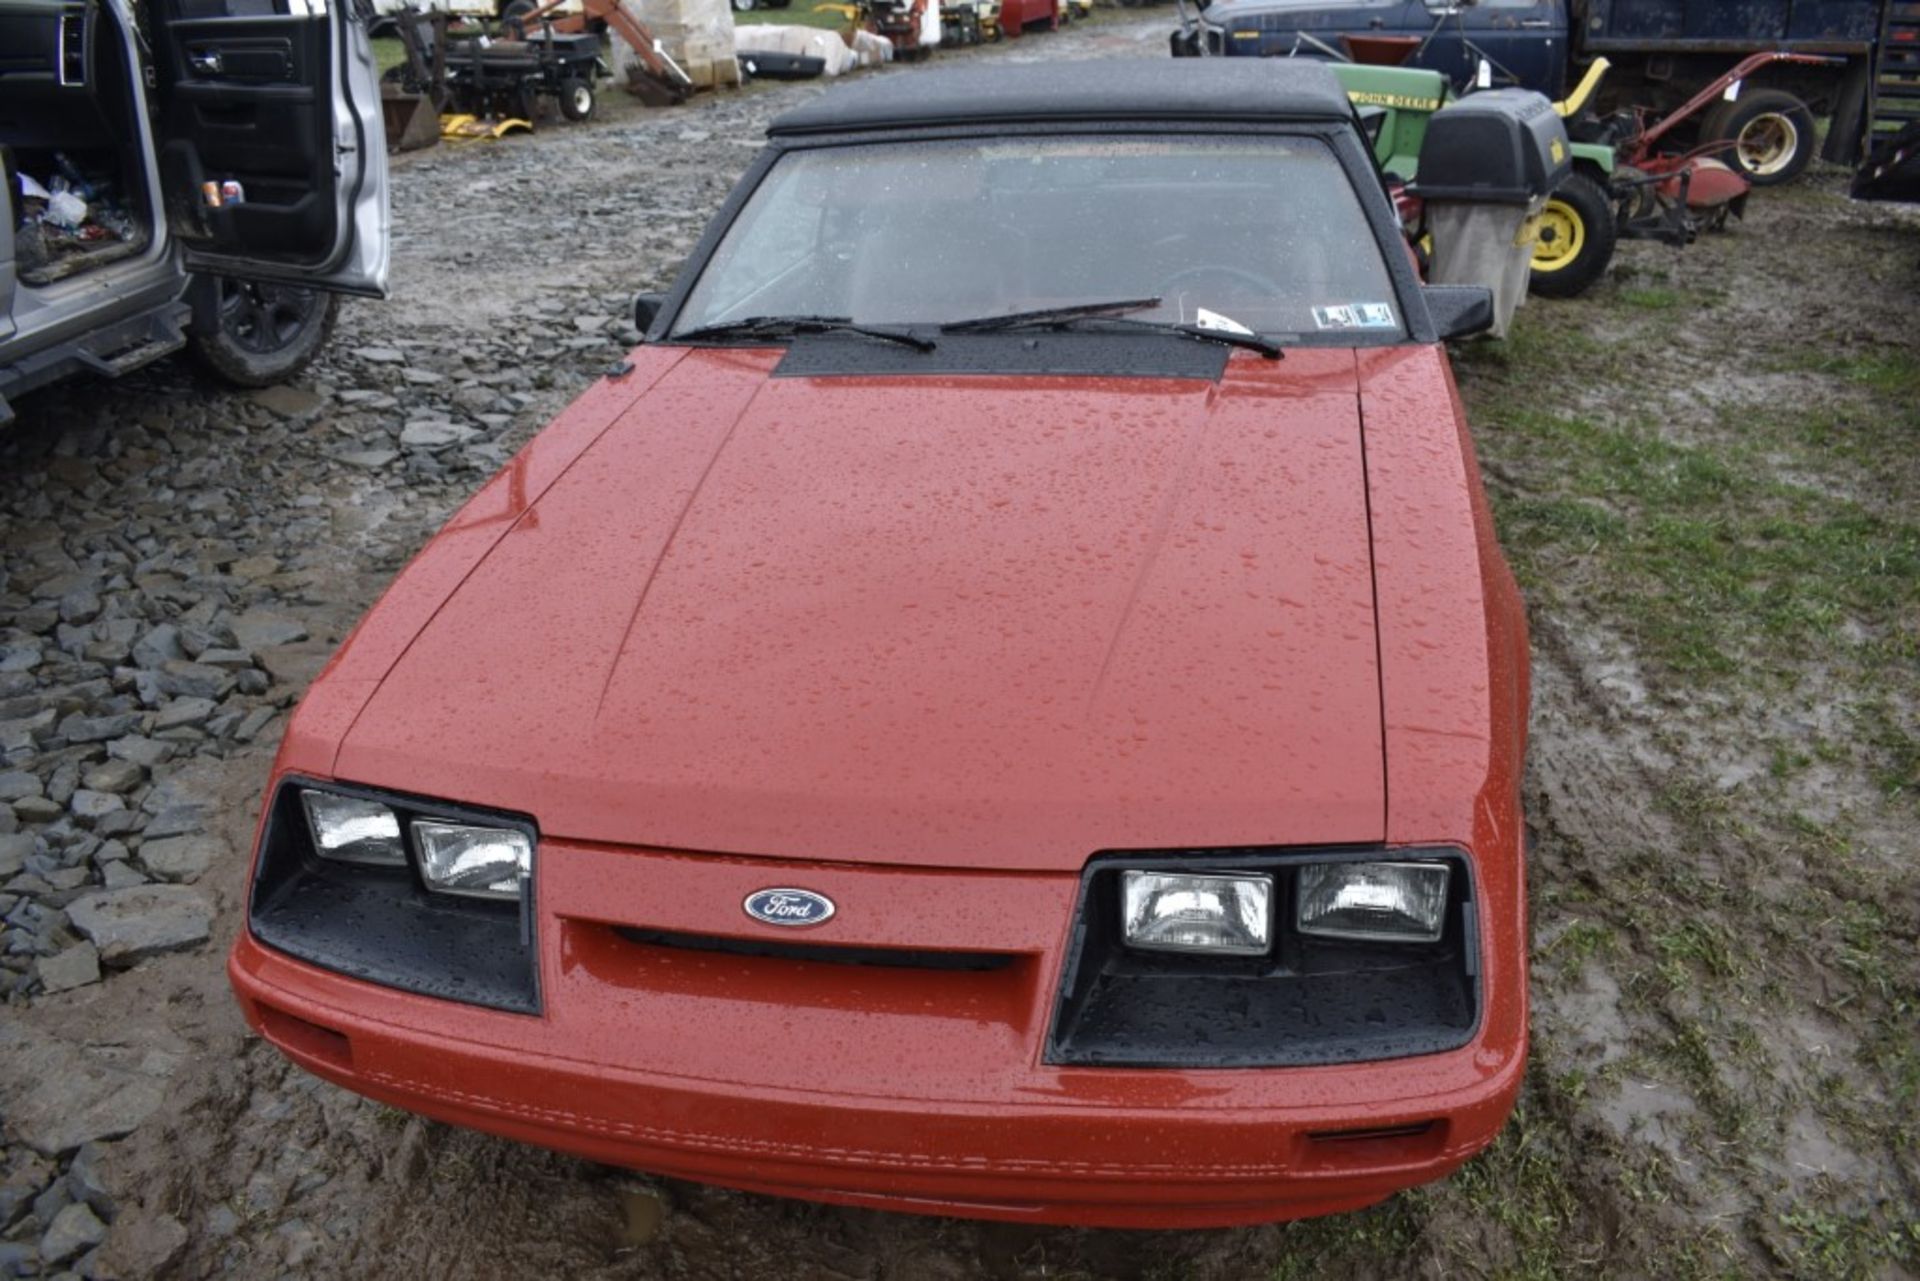 1986 Ford Mustang 5.0 Convertible - Image 3 of 44